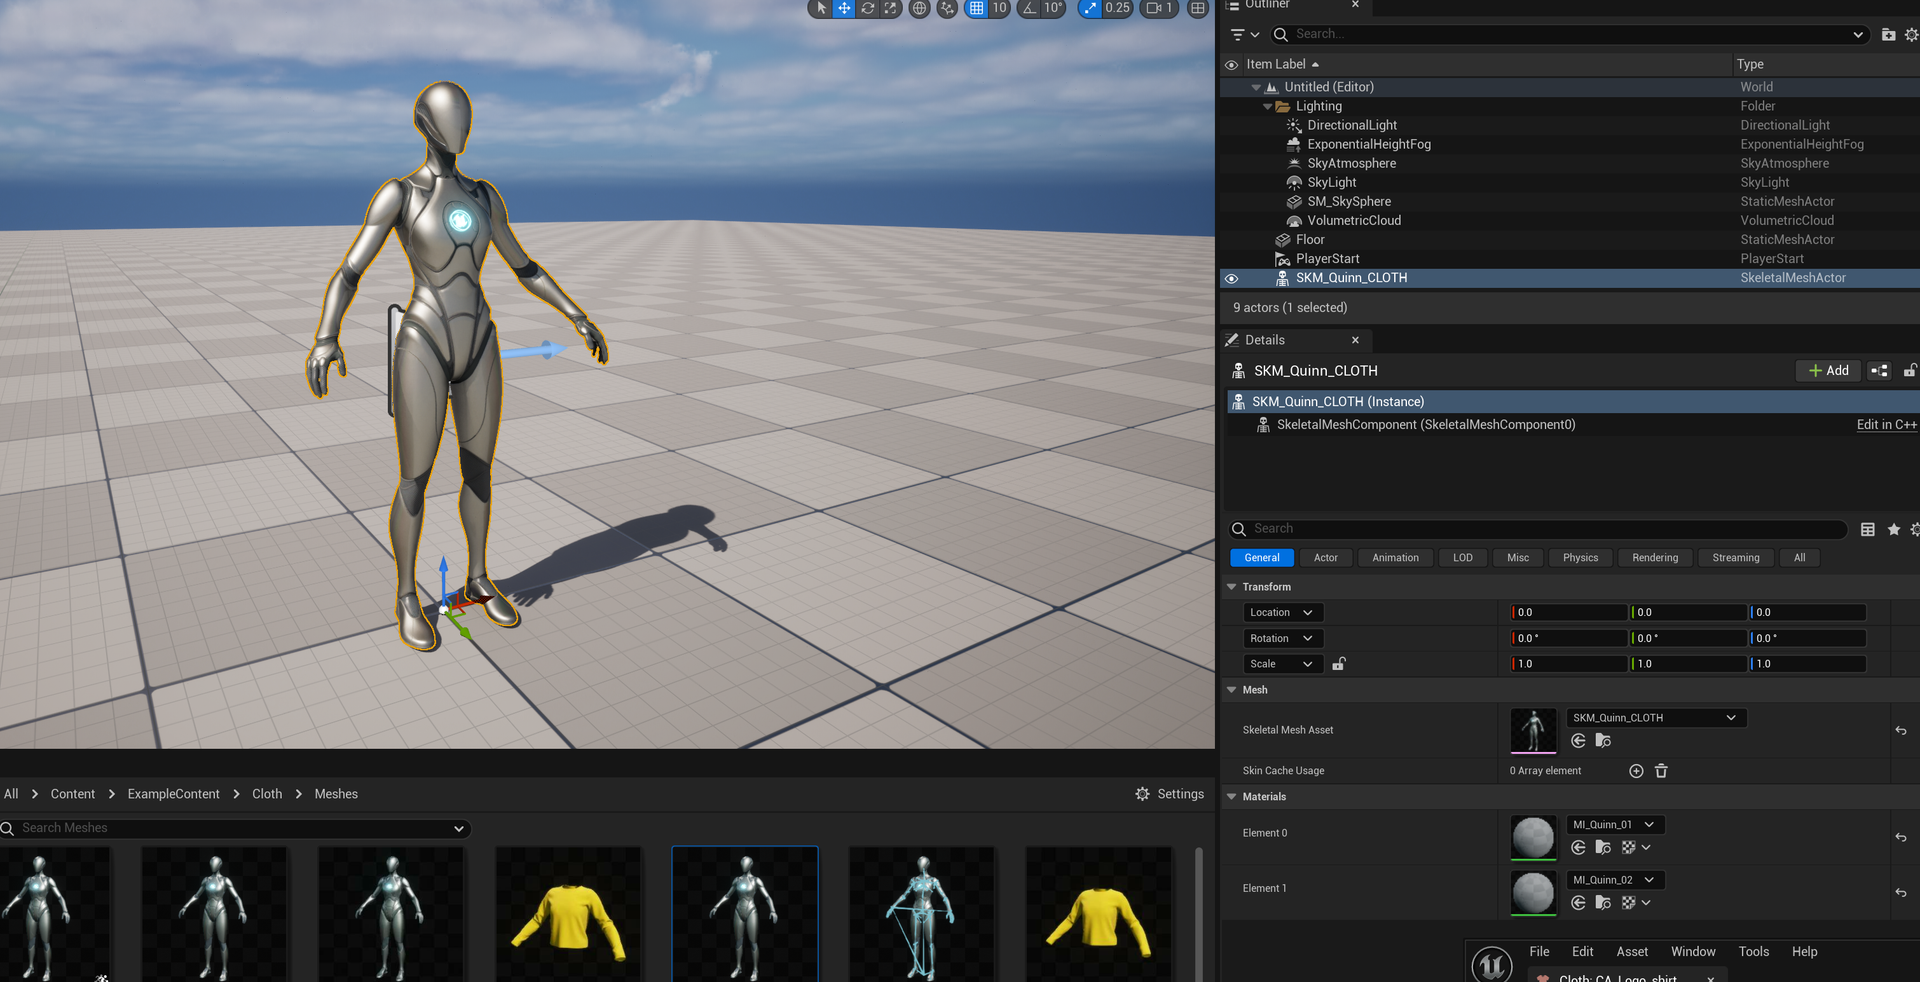 Panel Cloth Editor Overview  Unreal Engine 5.3 Documentation